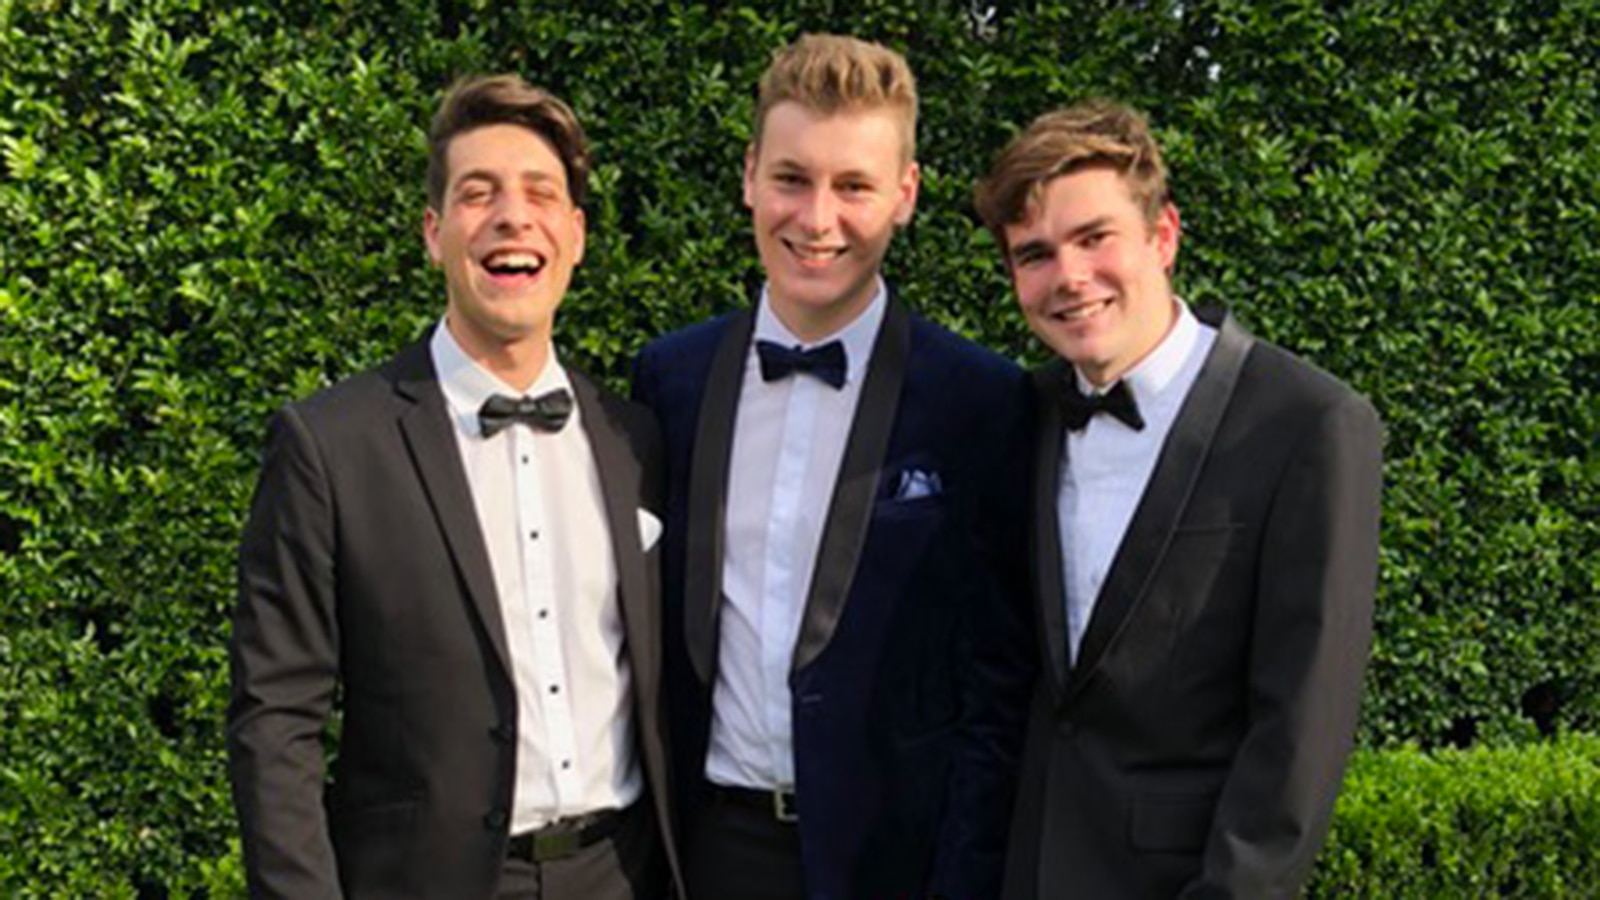 Finn, centre, with his boyfriend Tom Moiso, left, and a friend at his school formal. 